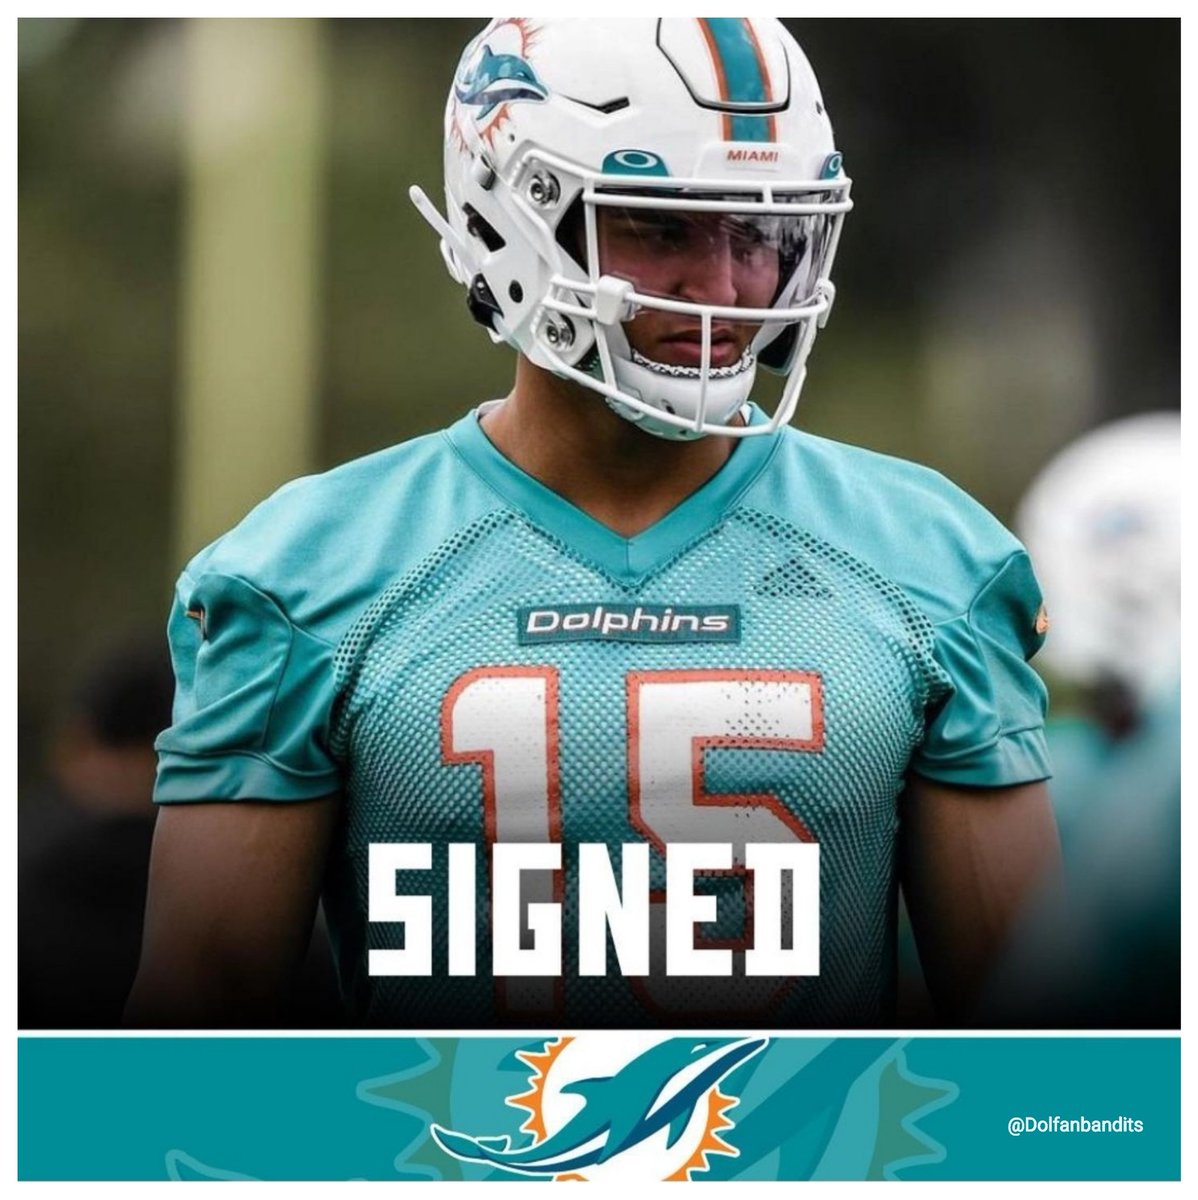 Miami Dolphins - RT @DolFanBandits: The Miami Dolphins signed No. 18 overal...